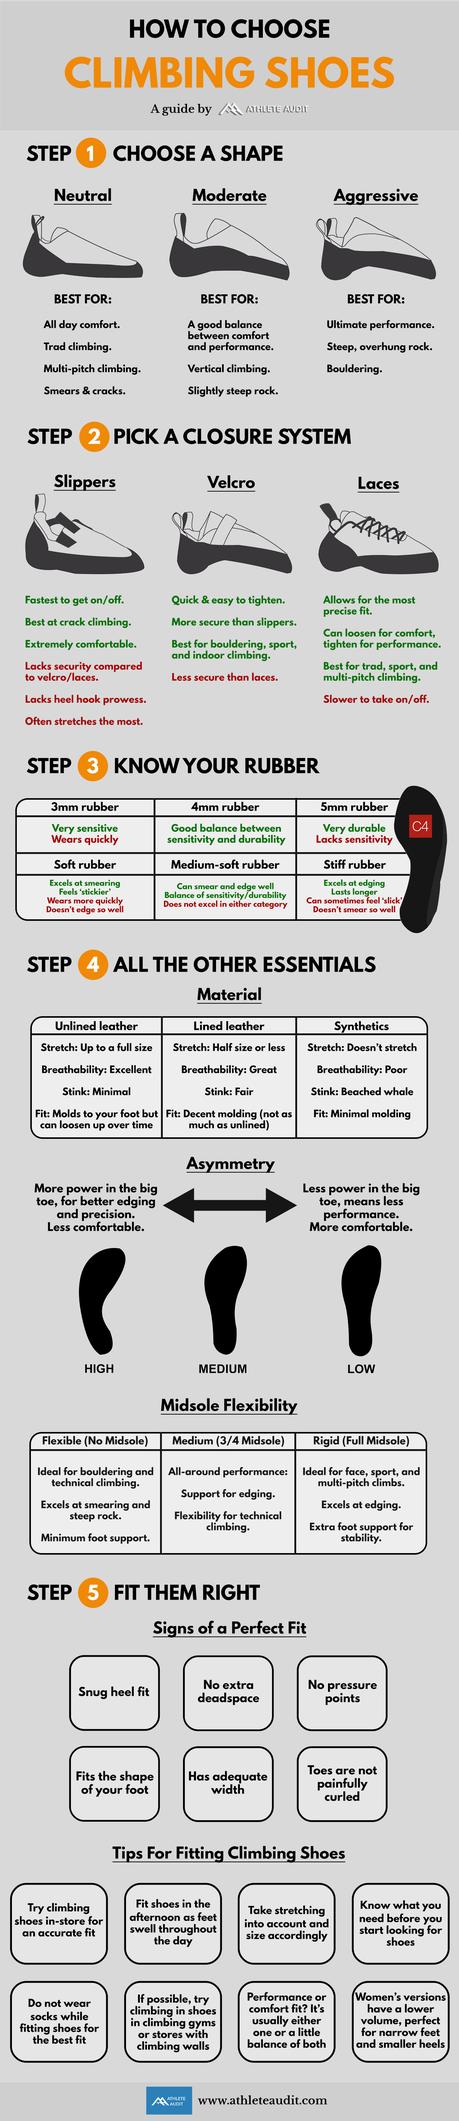 How to Choose Climbing Shoes - Best Climbing Shoes for Beginners - Infographic - Athlete Audit